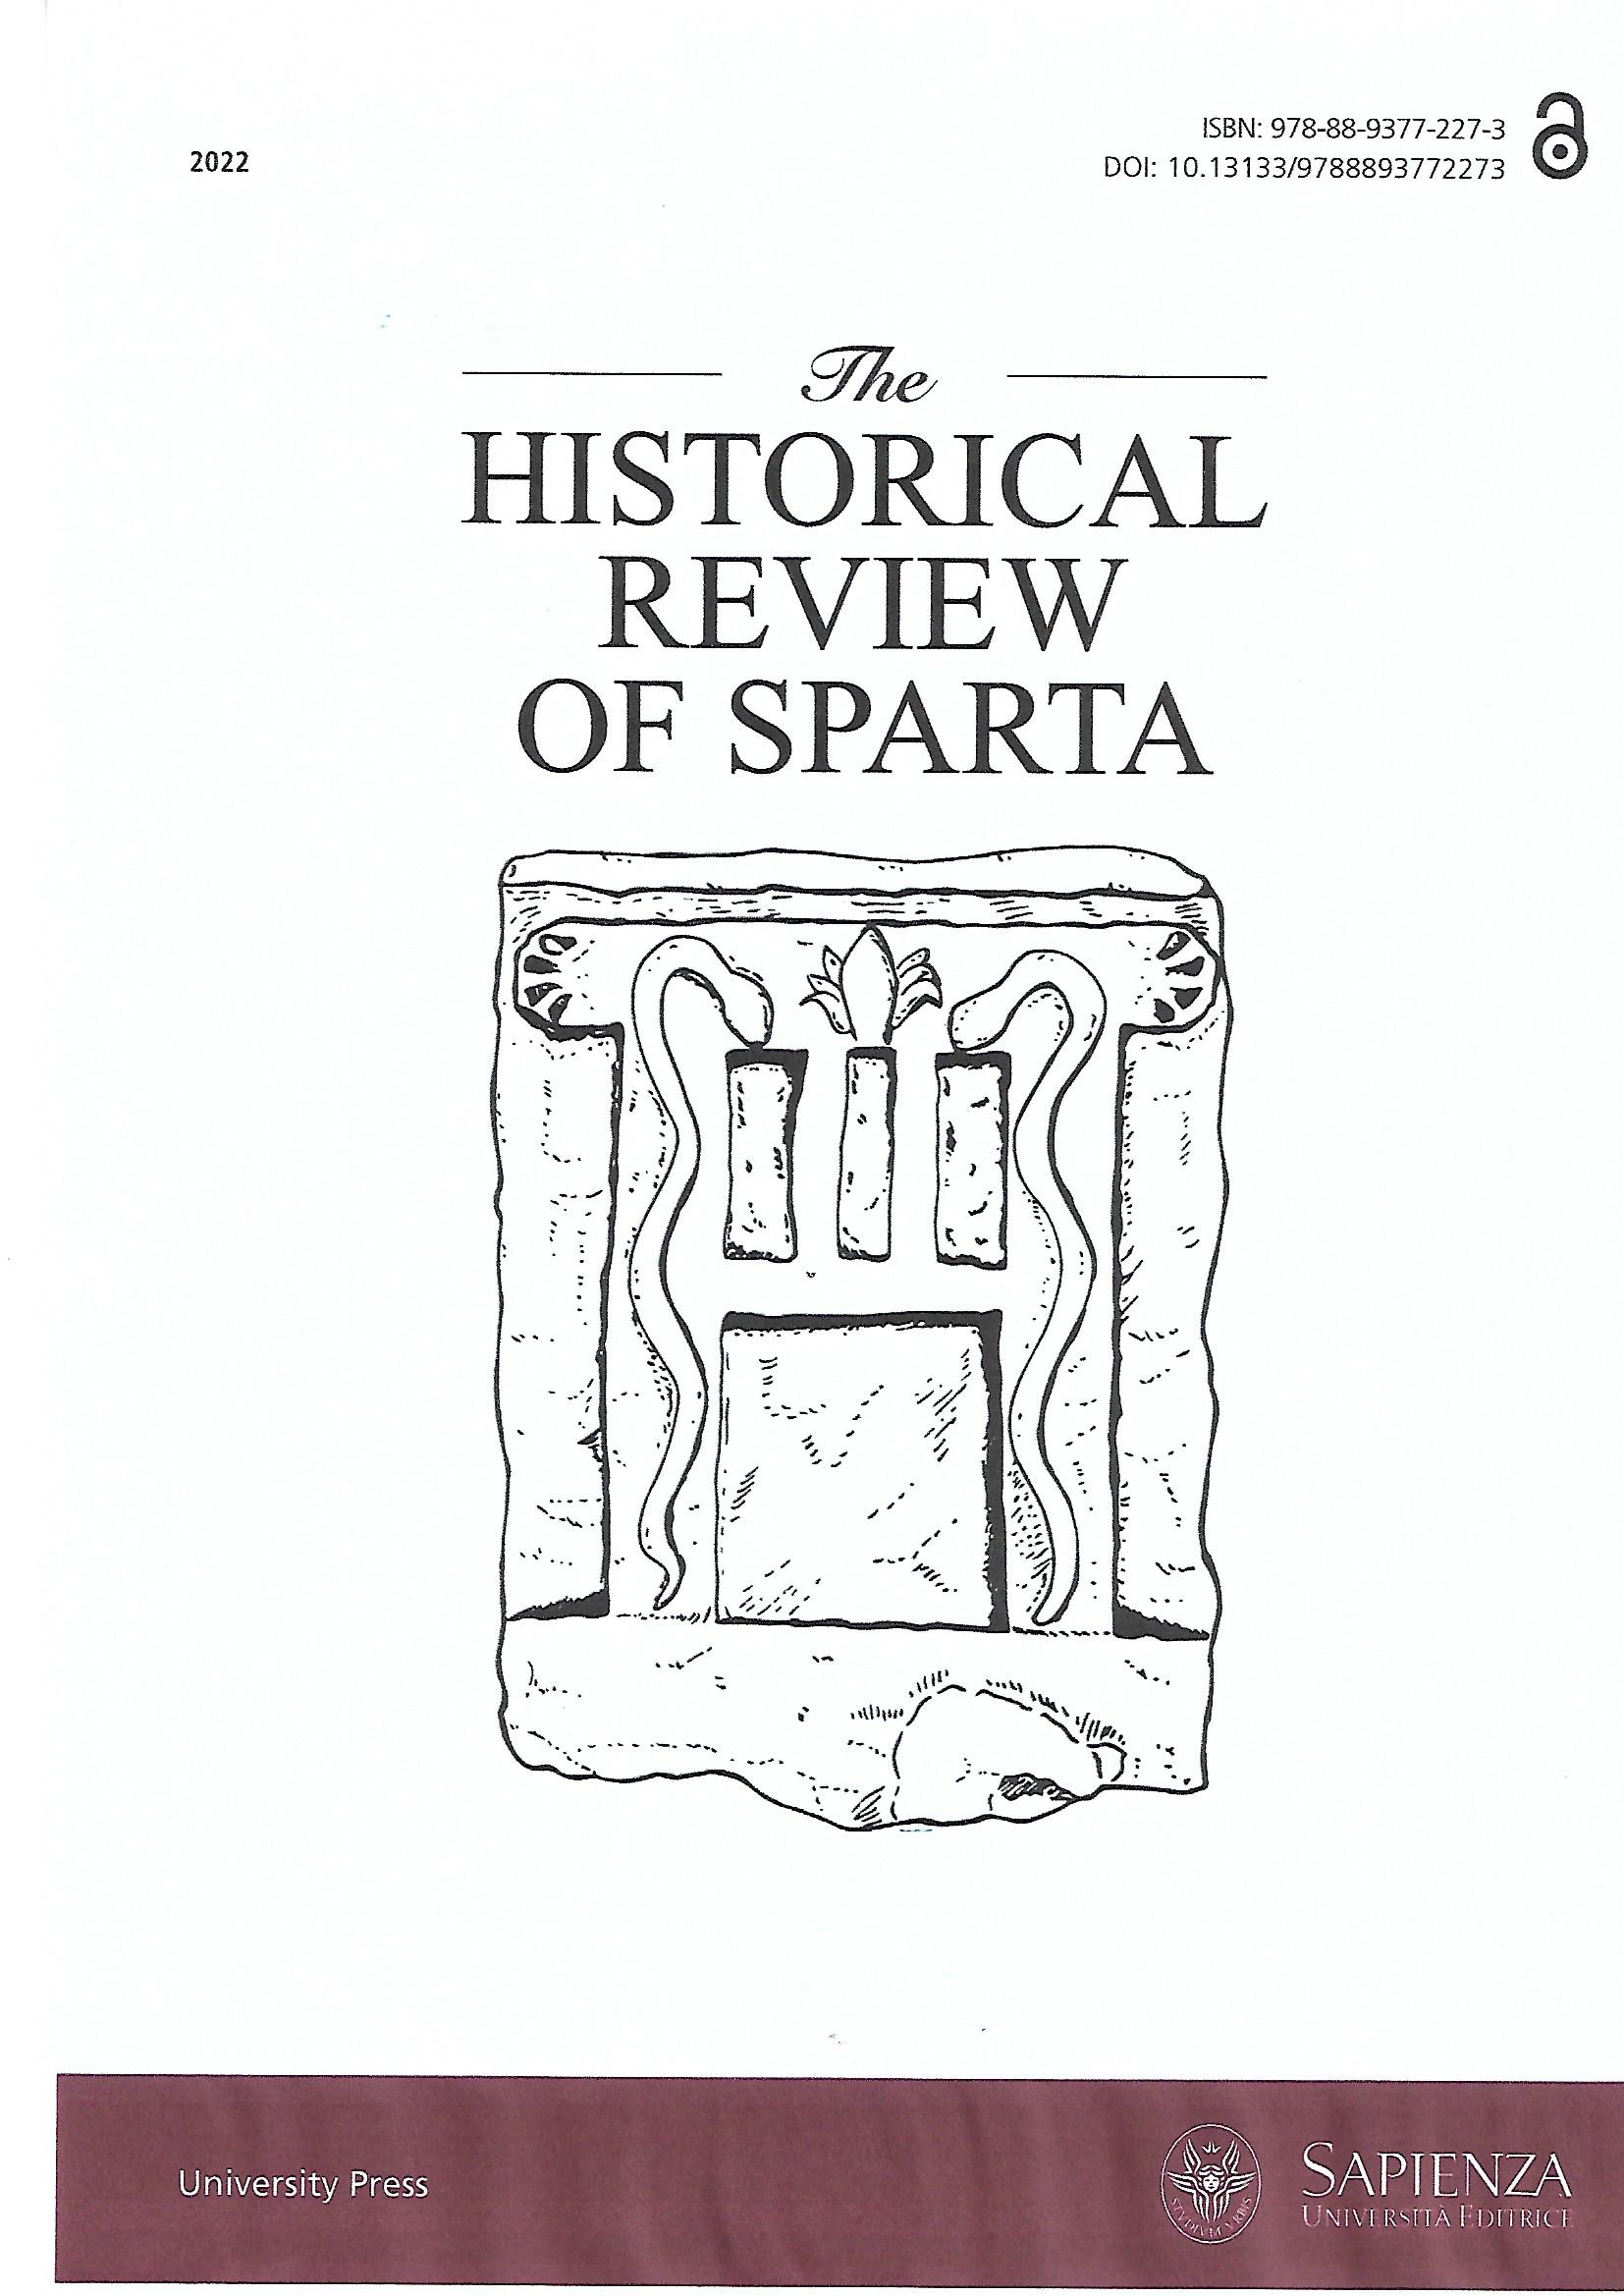 THE HISTORICAL REVIEW OF SPARTA